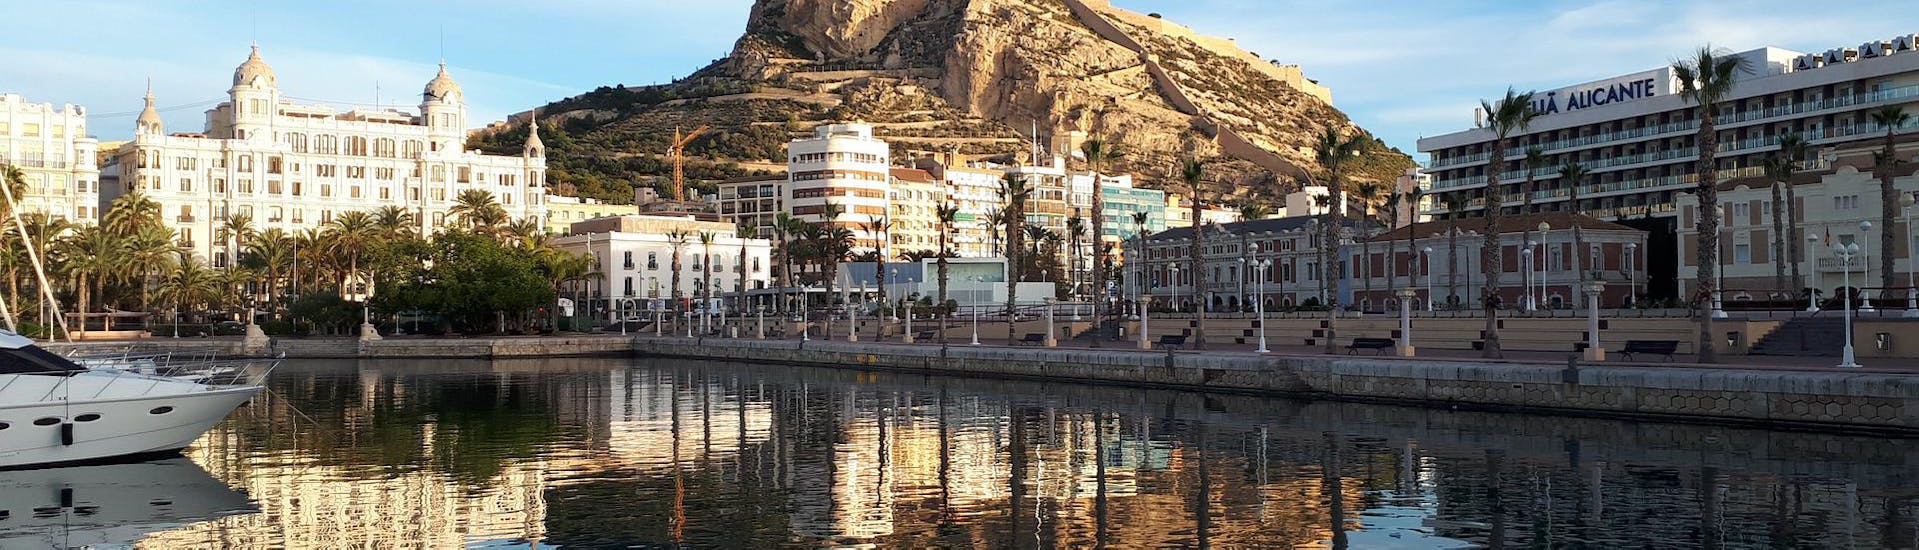 One of the views you can see during a boat rental in Alicante (up to 7 people) with licence with Samba Boats Alicante.